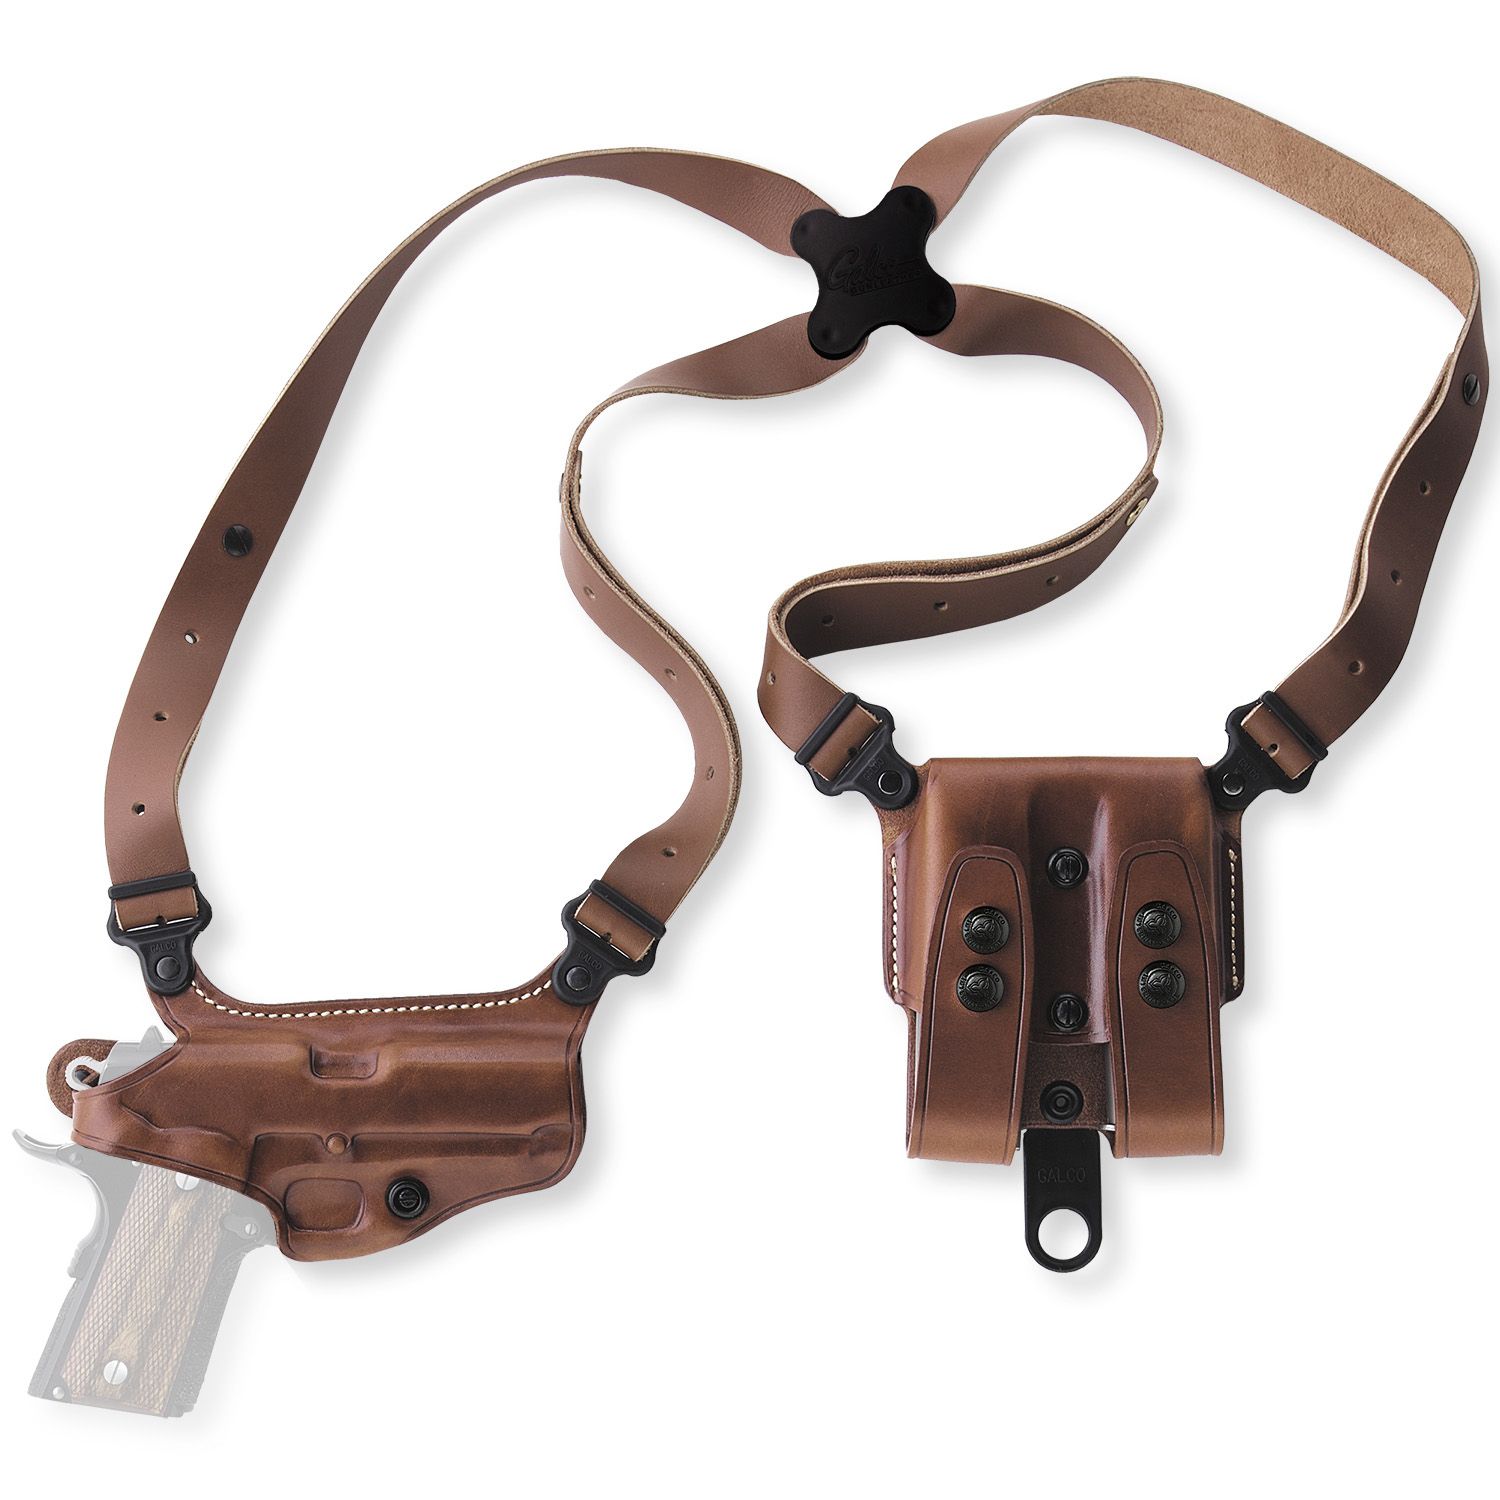 Galco Miami Classic Shoulder Holster System Tan 5in 1911-Style Pistols: MC212